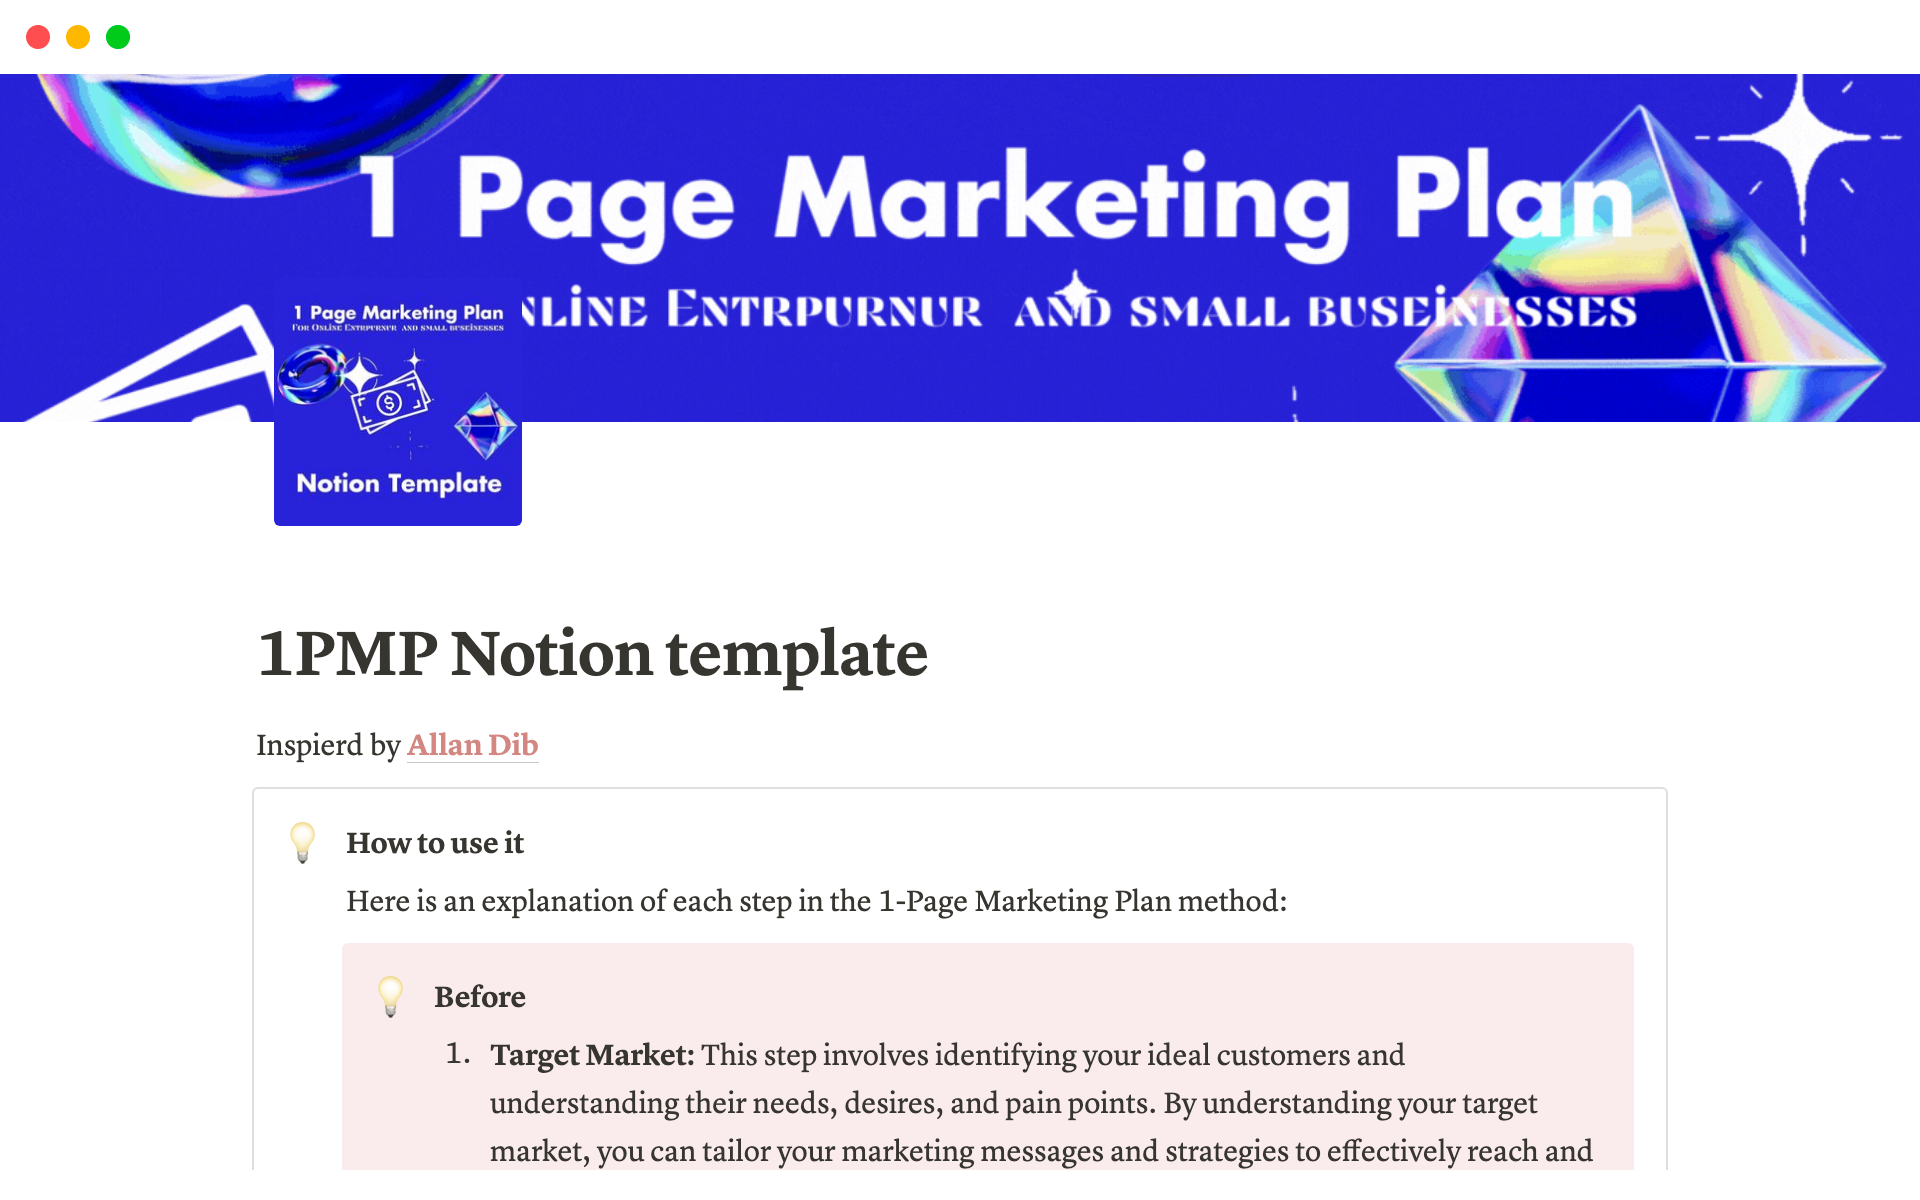 A template preview for MarketBoost: The Ultimate 1-Page Marketing Plan Notion Template for Small Online Businesses